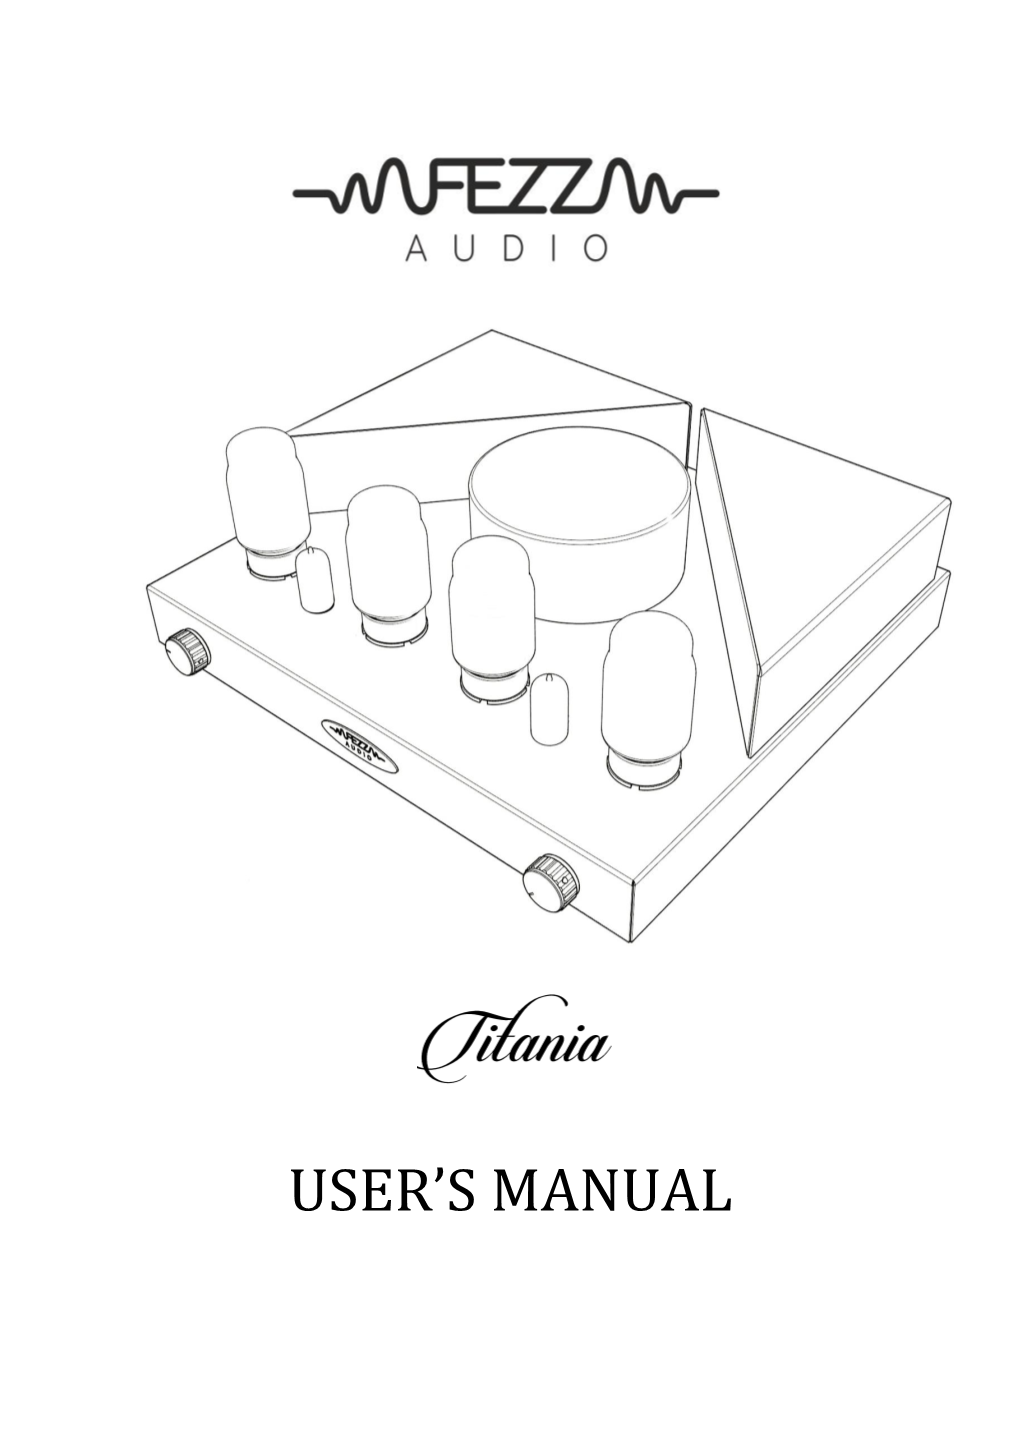 Titania Amplifier Near Heat Sources, Such As Radiators, Heaters Or Direct Sunlight